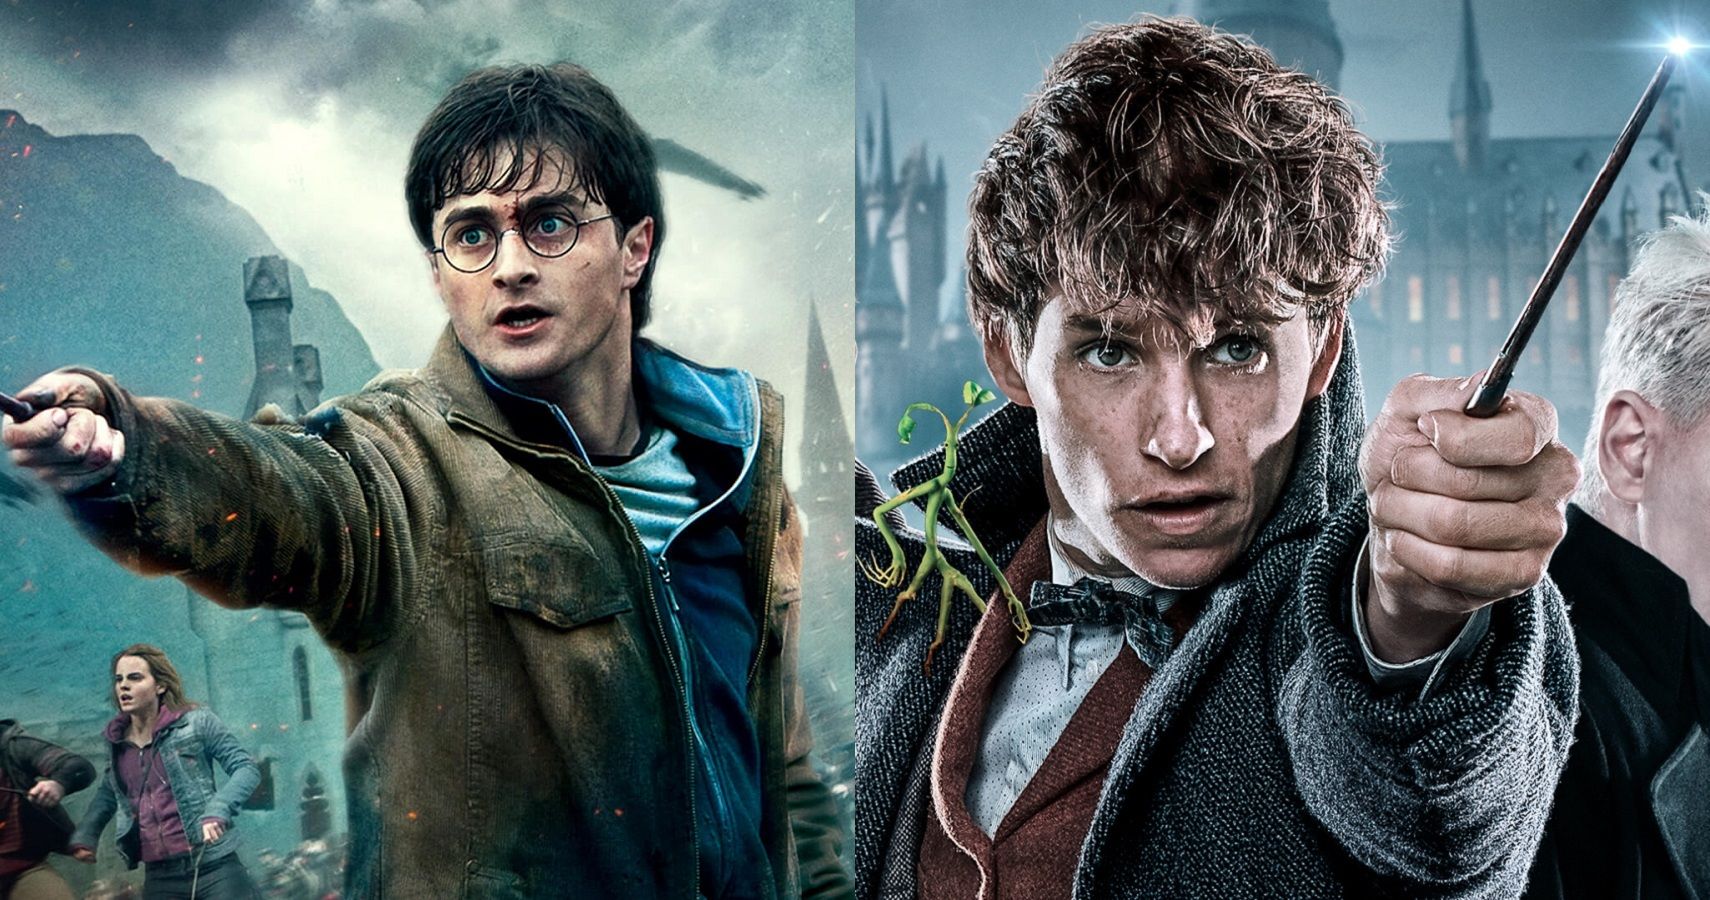 Is Fantastic Beasts Connected To Harry Potter?